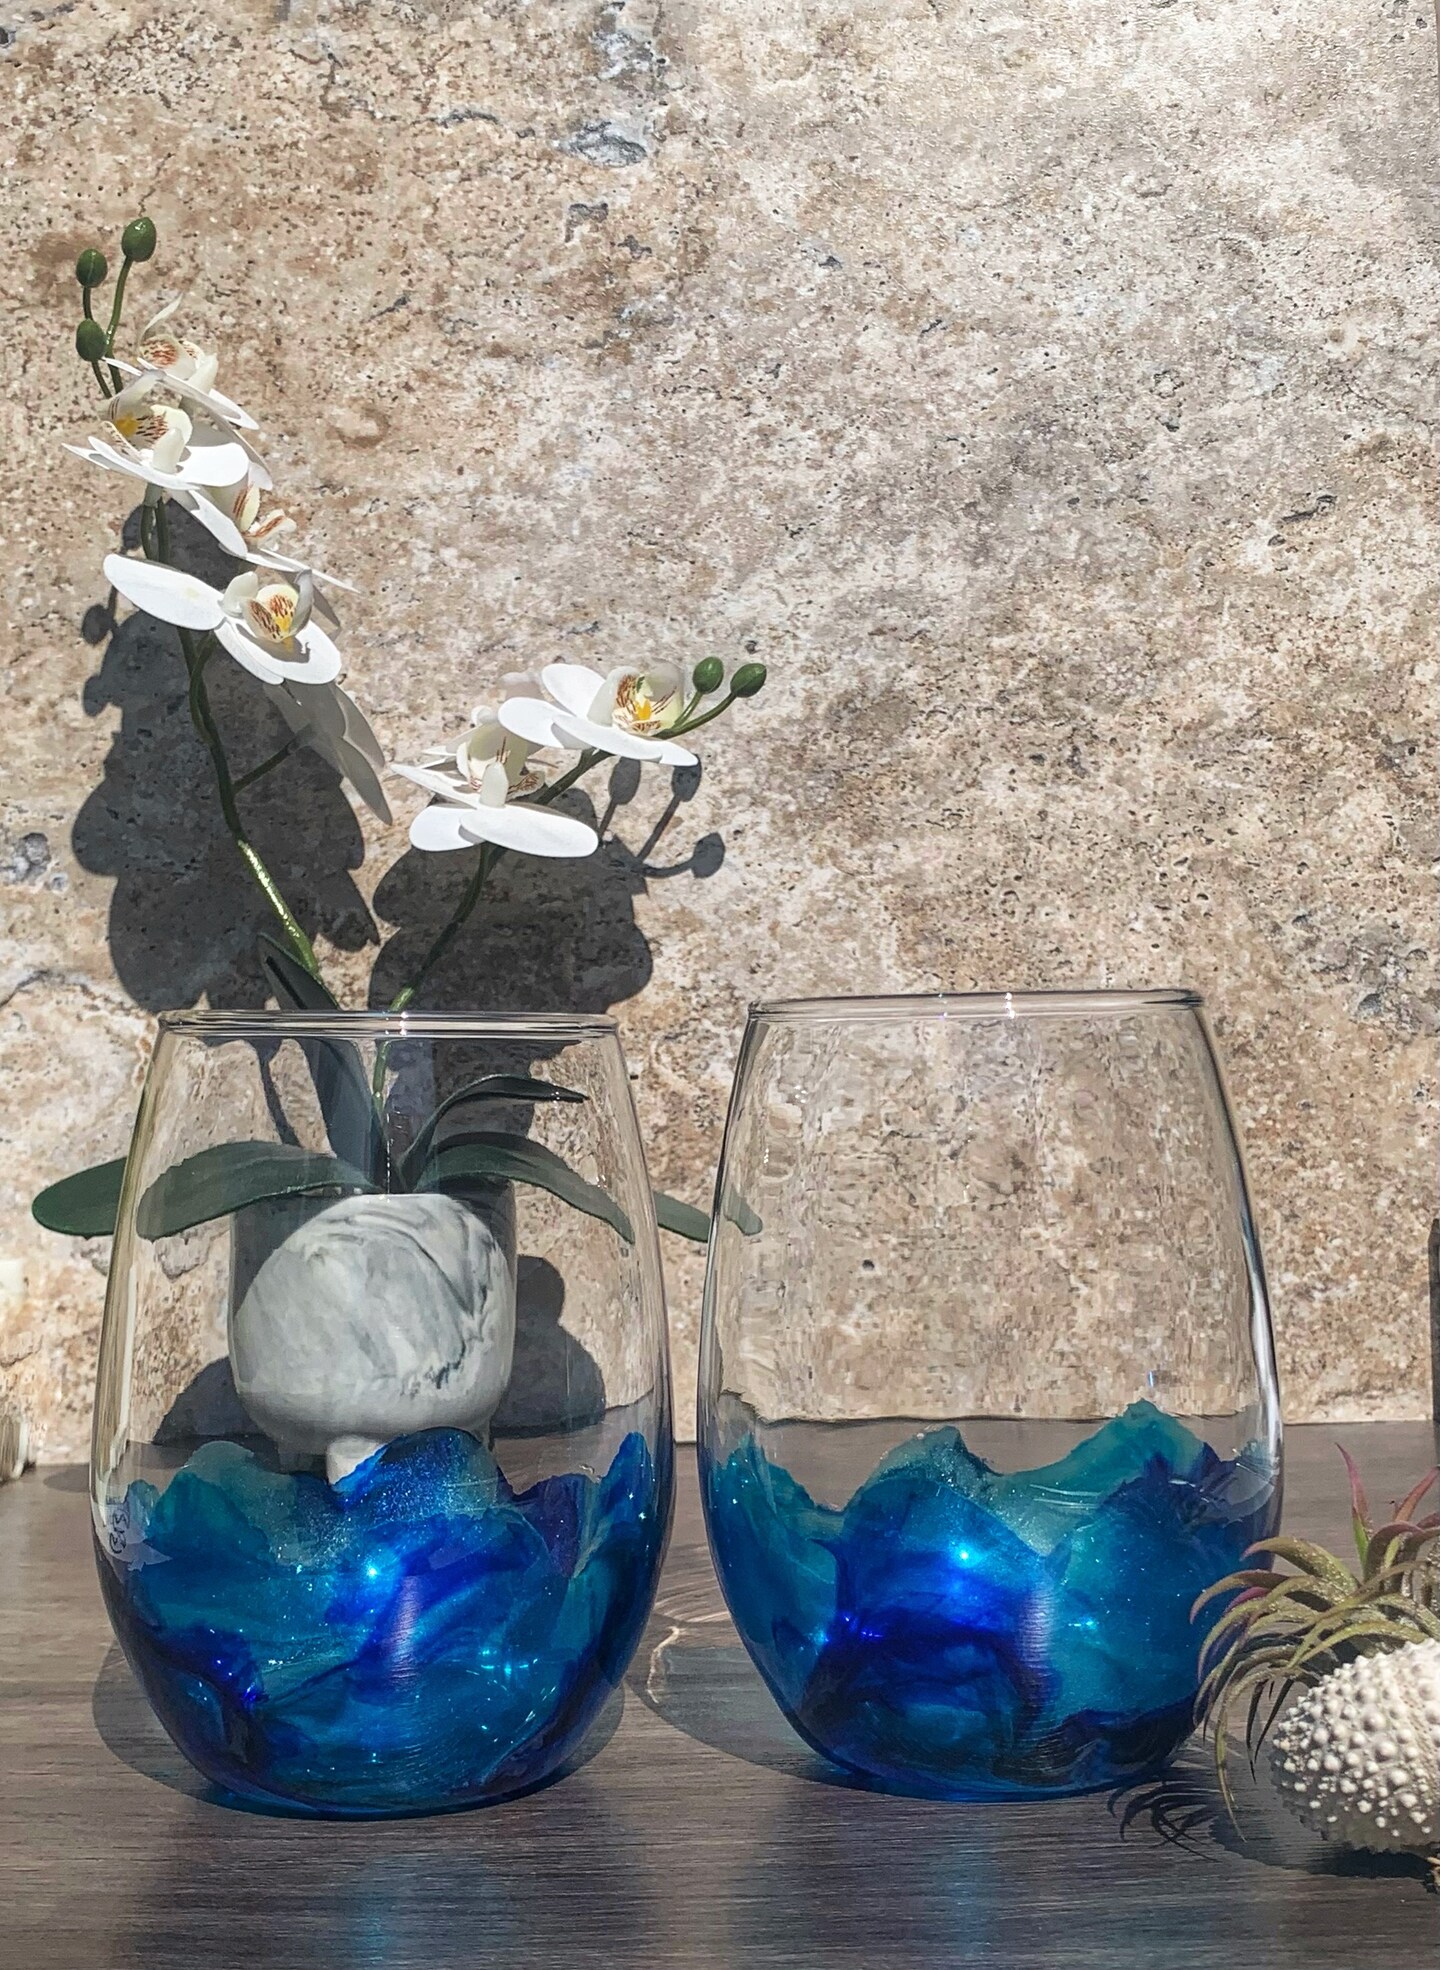 Blue wine glasses - stemless wineglasses finished with food safe epoxy resin